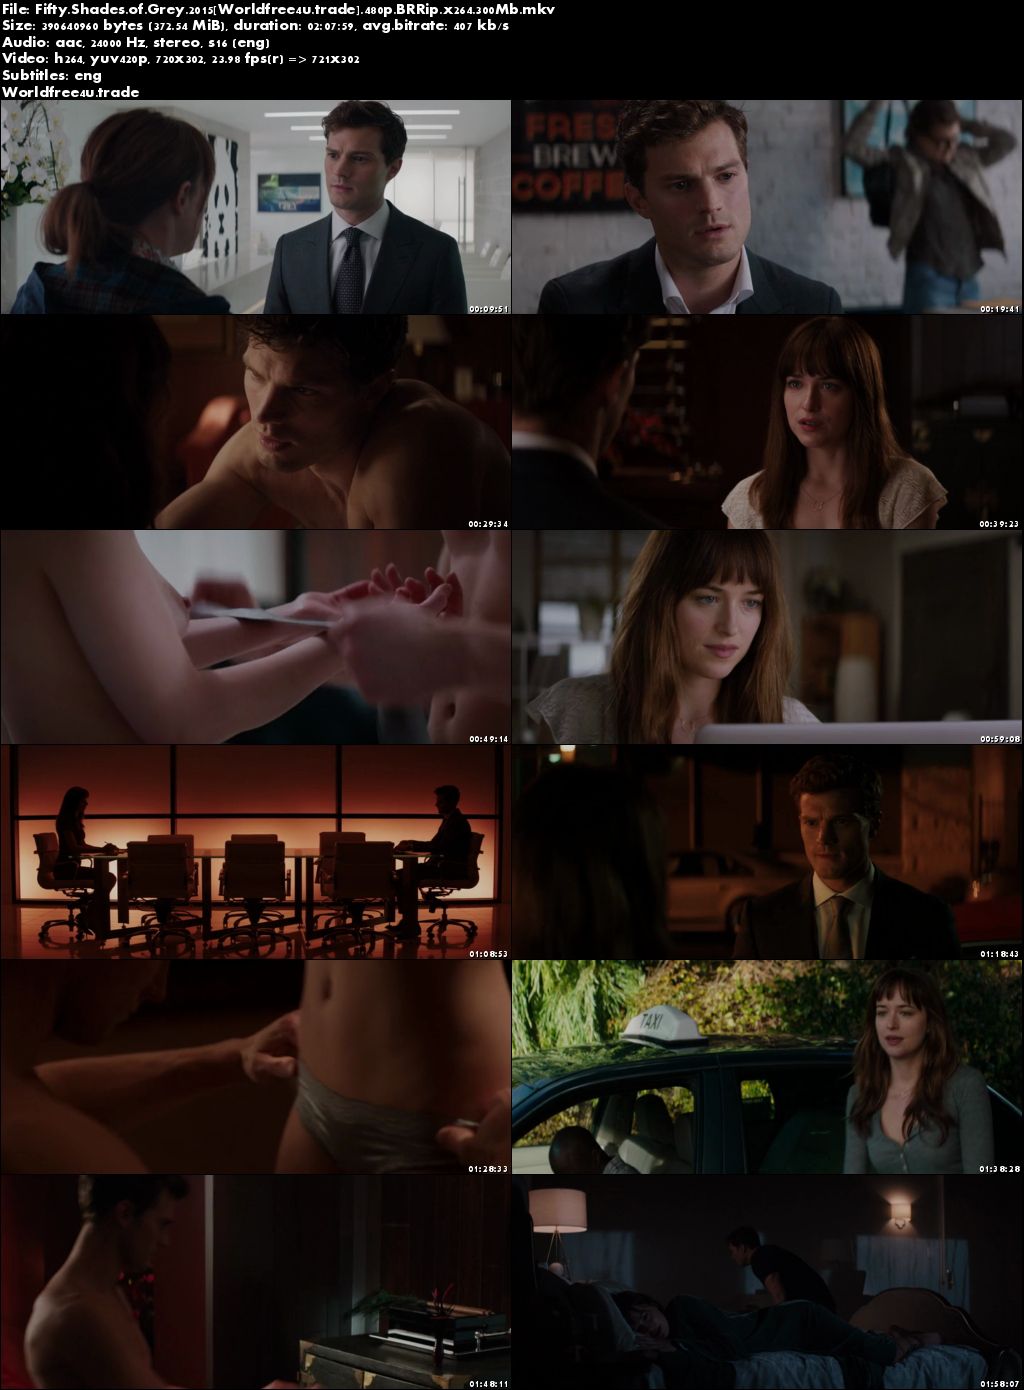 fifty shades of grey movie full movie download